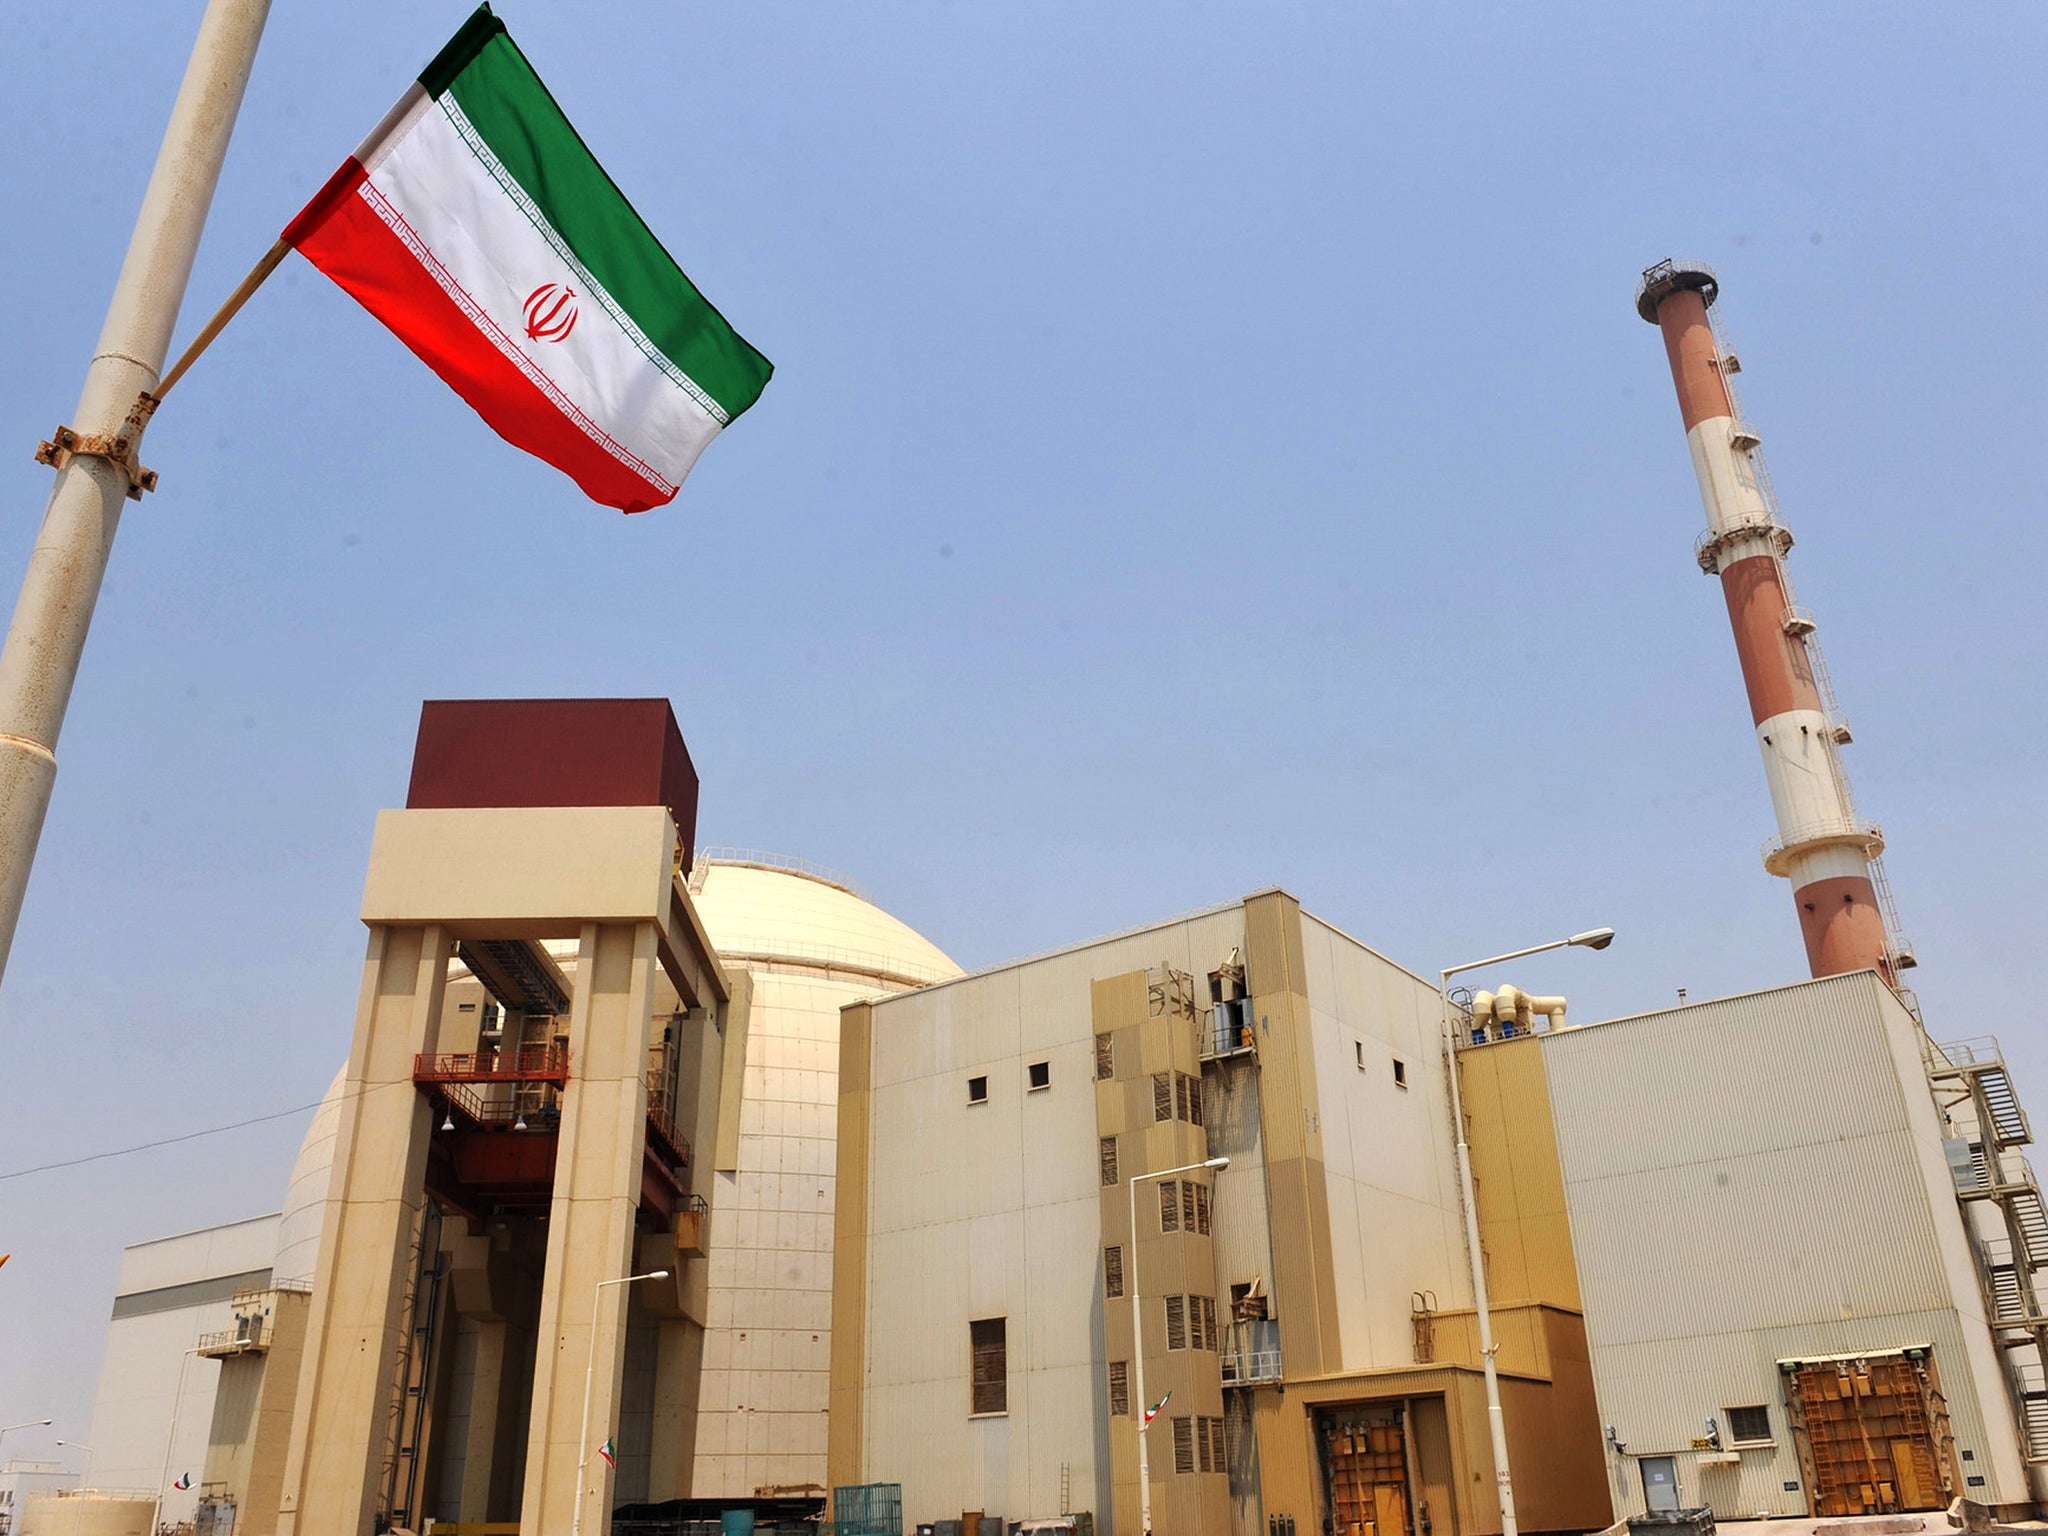 The IAEA produced a report that strongly suggested Iran had a secret nuclear weapons programme up until 2003